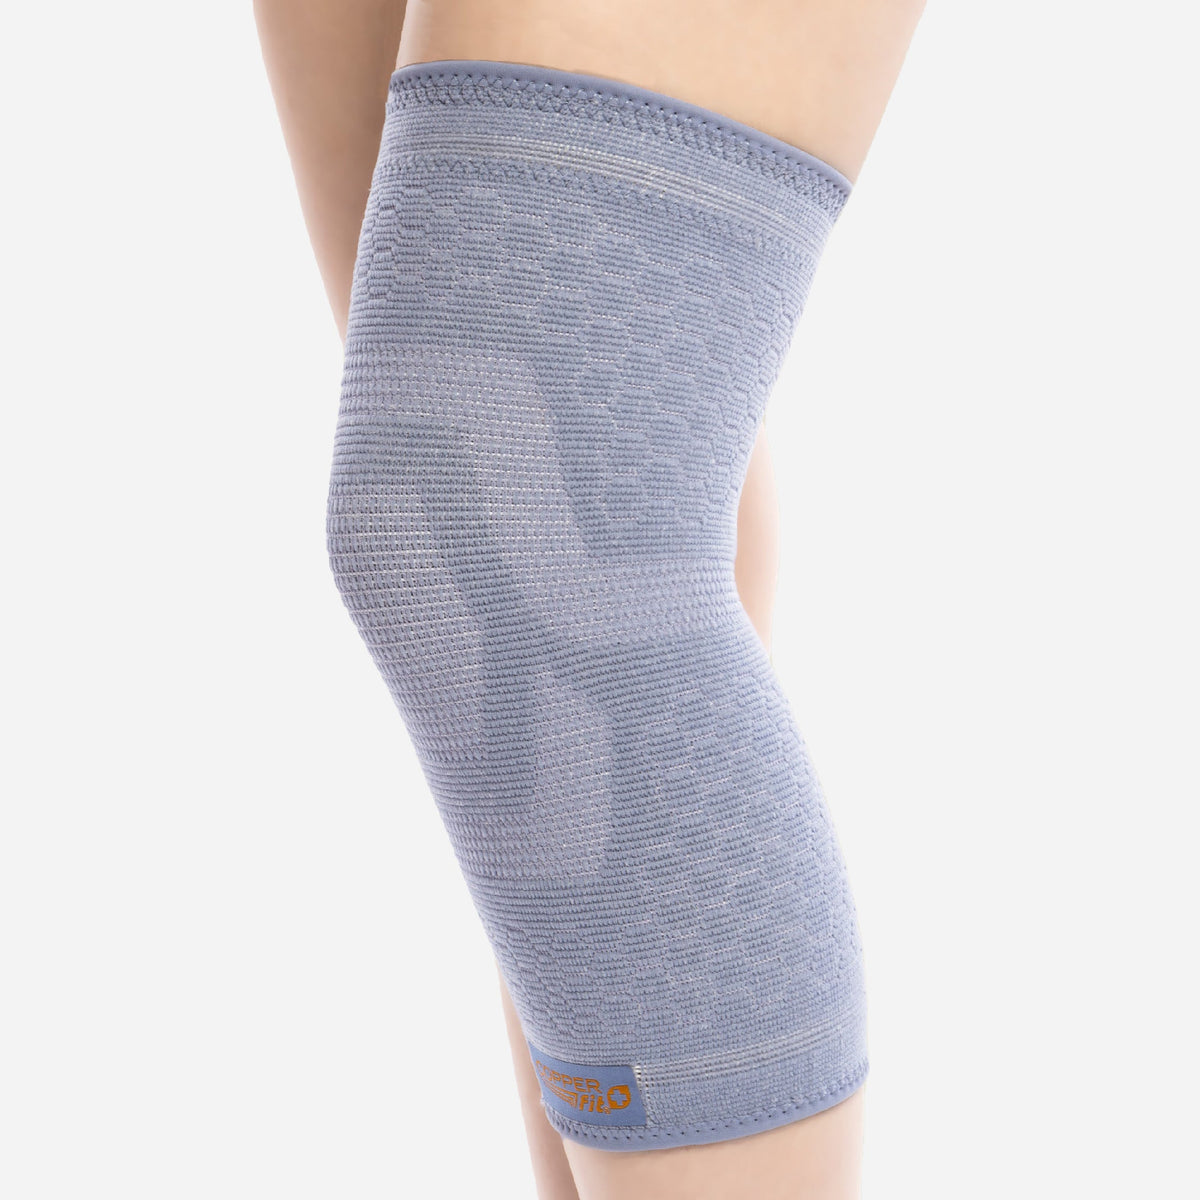 New Copper Fit Knee Sleeve Men & Women for Compression Flexibility